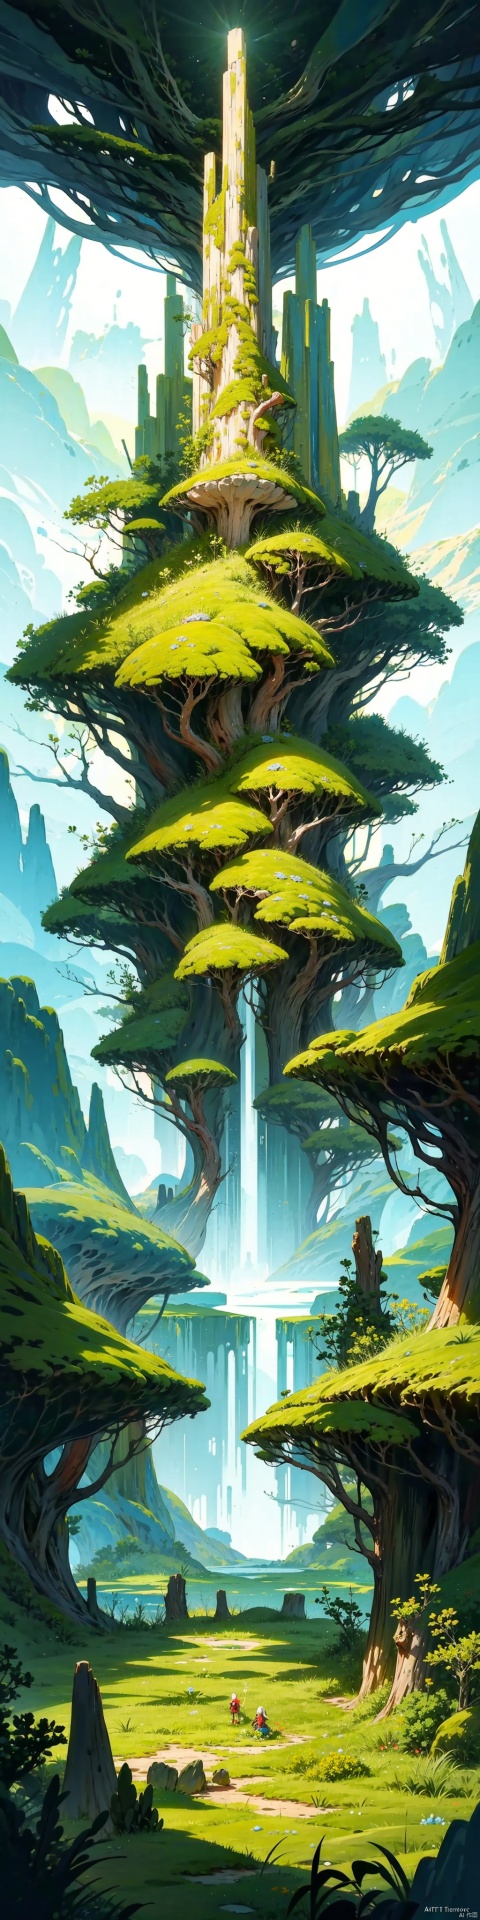  A mystical and epic landscape, featuring a fantastical and surreal world of floating islands, giant trees, and mythical creatures, that transport the viewer to a world of imagination and wonder, artstation, digital art, intricate, trending, bright colors, moss(style)